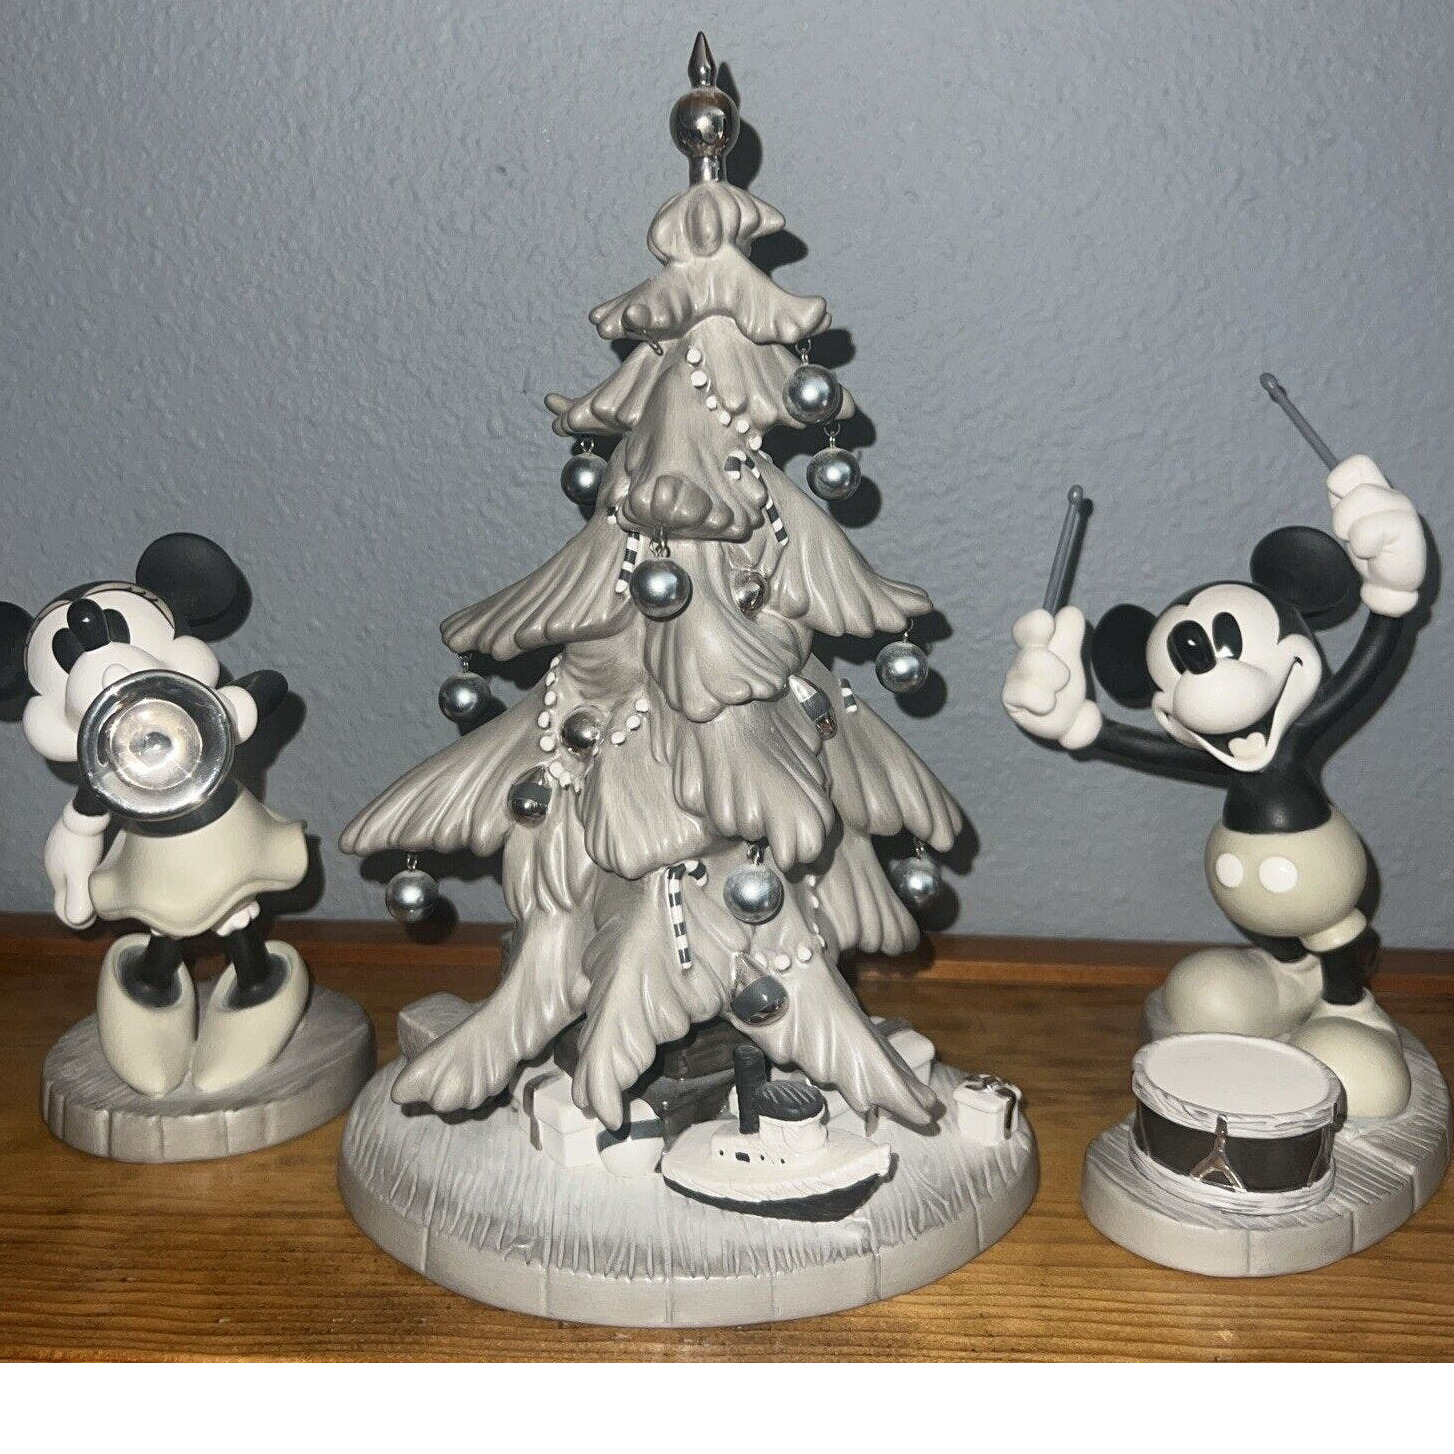 WDCC - Disney - Mickey & Minnie - Hooray For The Holidays - RARE - Complete Set